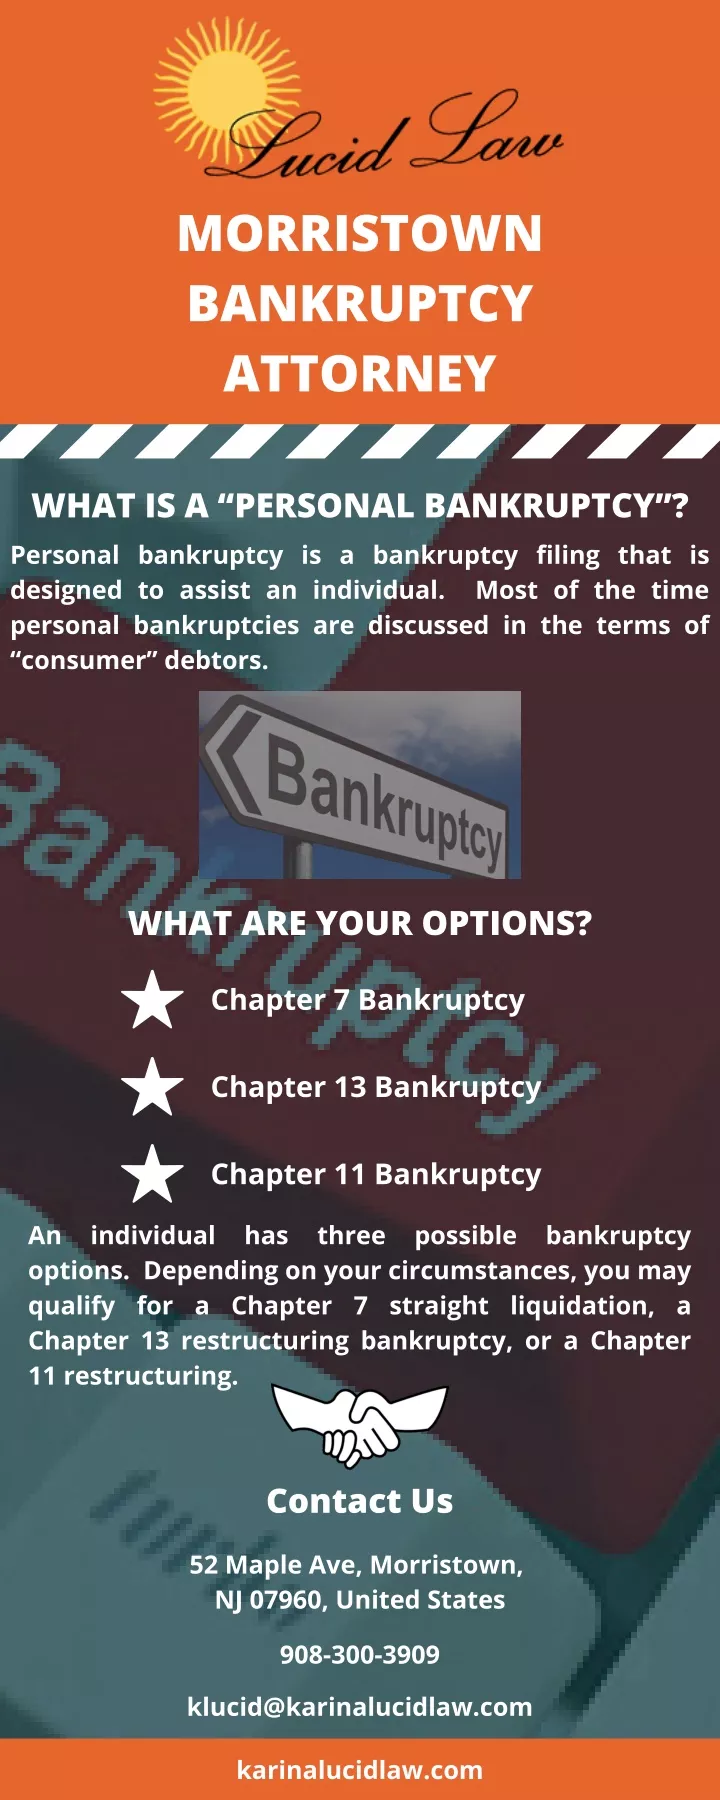 morristown bankruptcy attorney